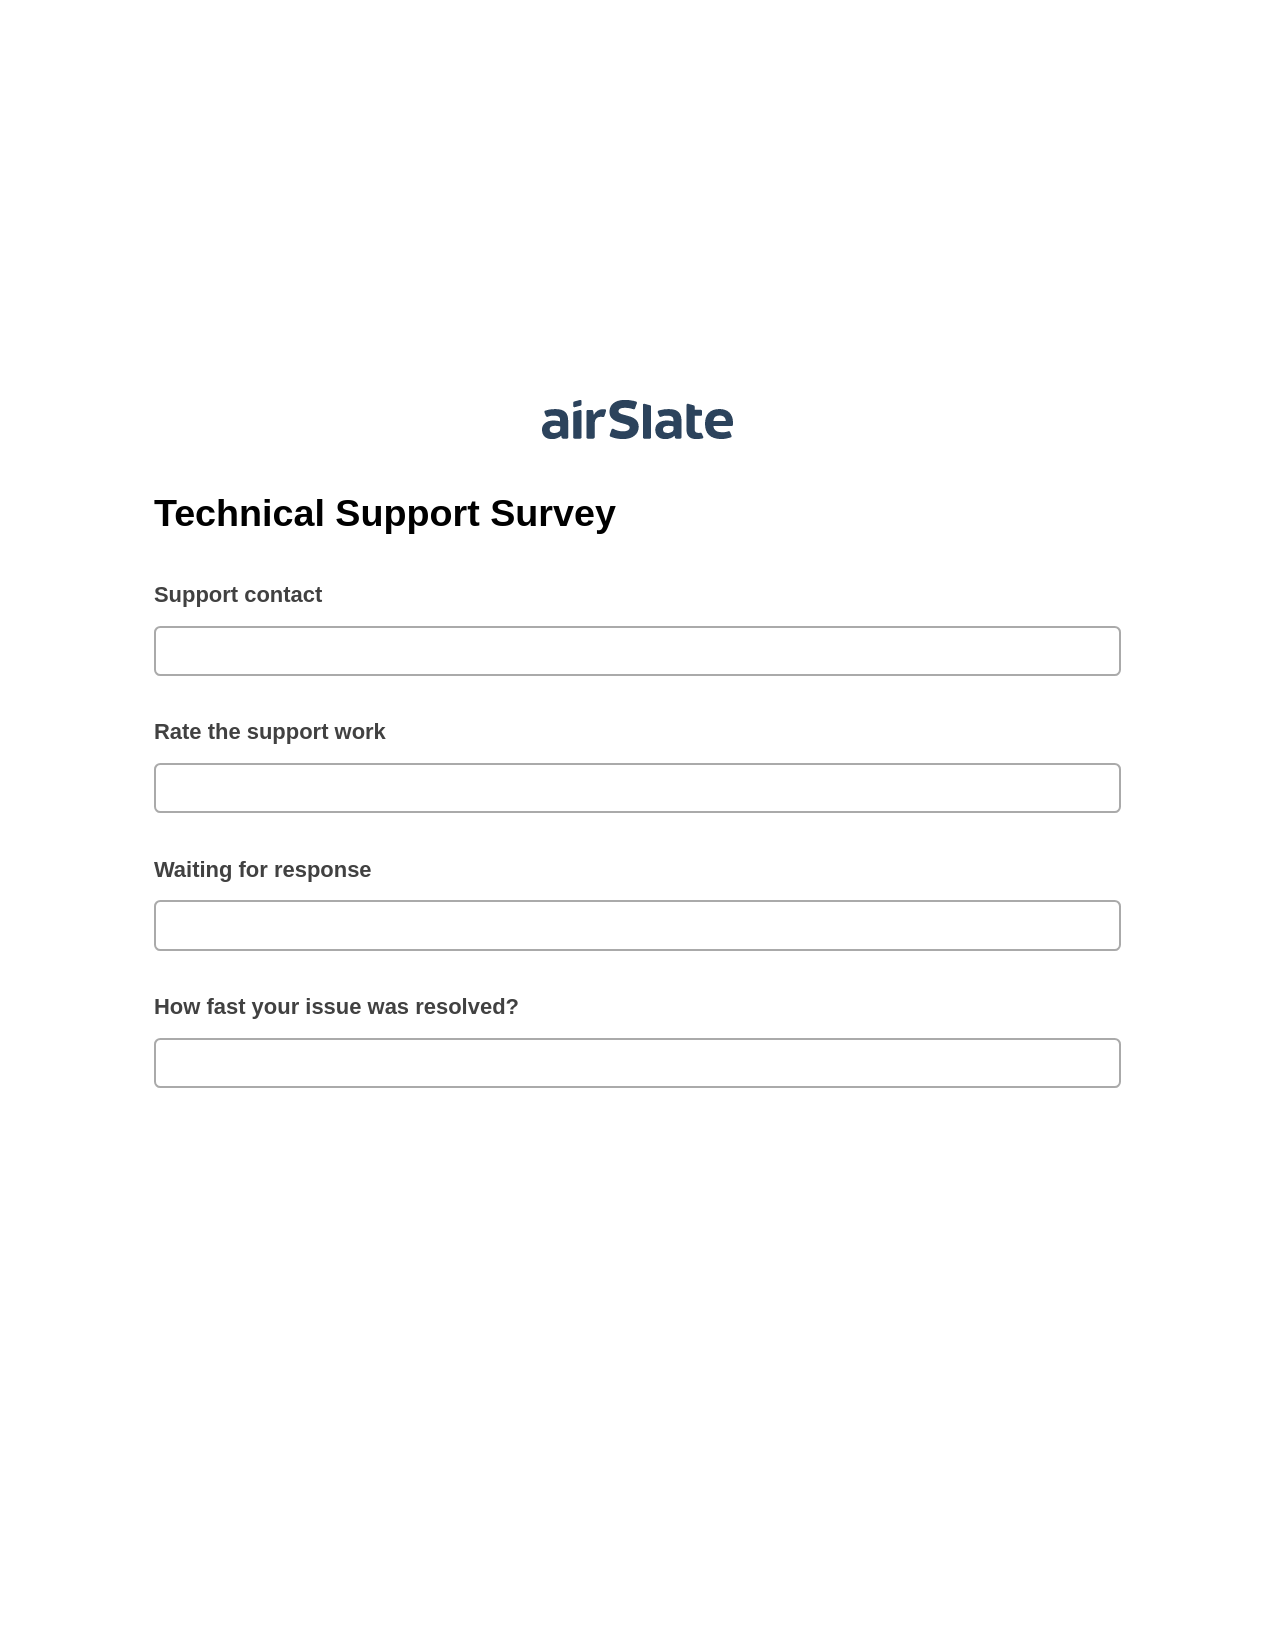 Technical Support Survey Pre-fill from Salesforce Records Bot, Roles Reminder Bot, Archive to OneDrive Bot